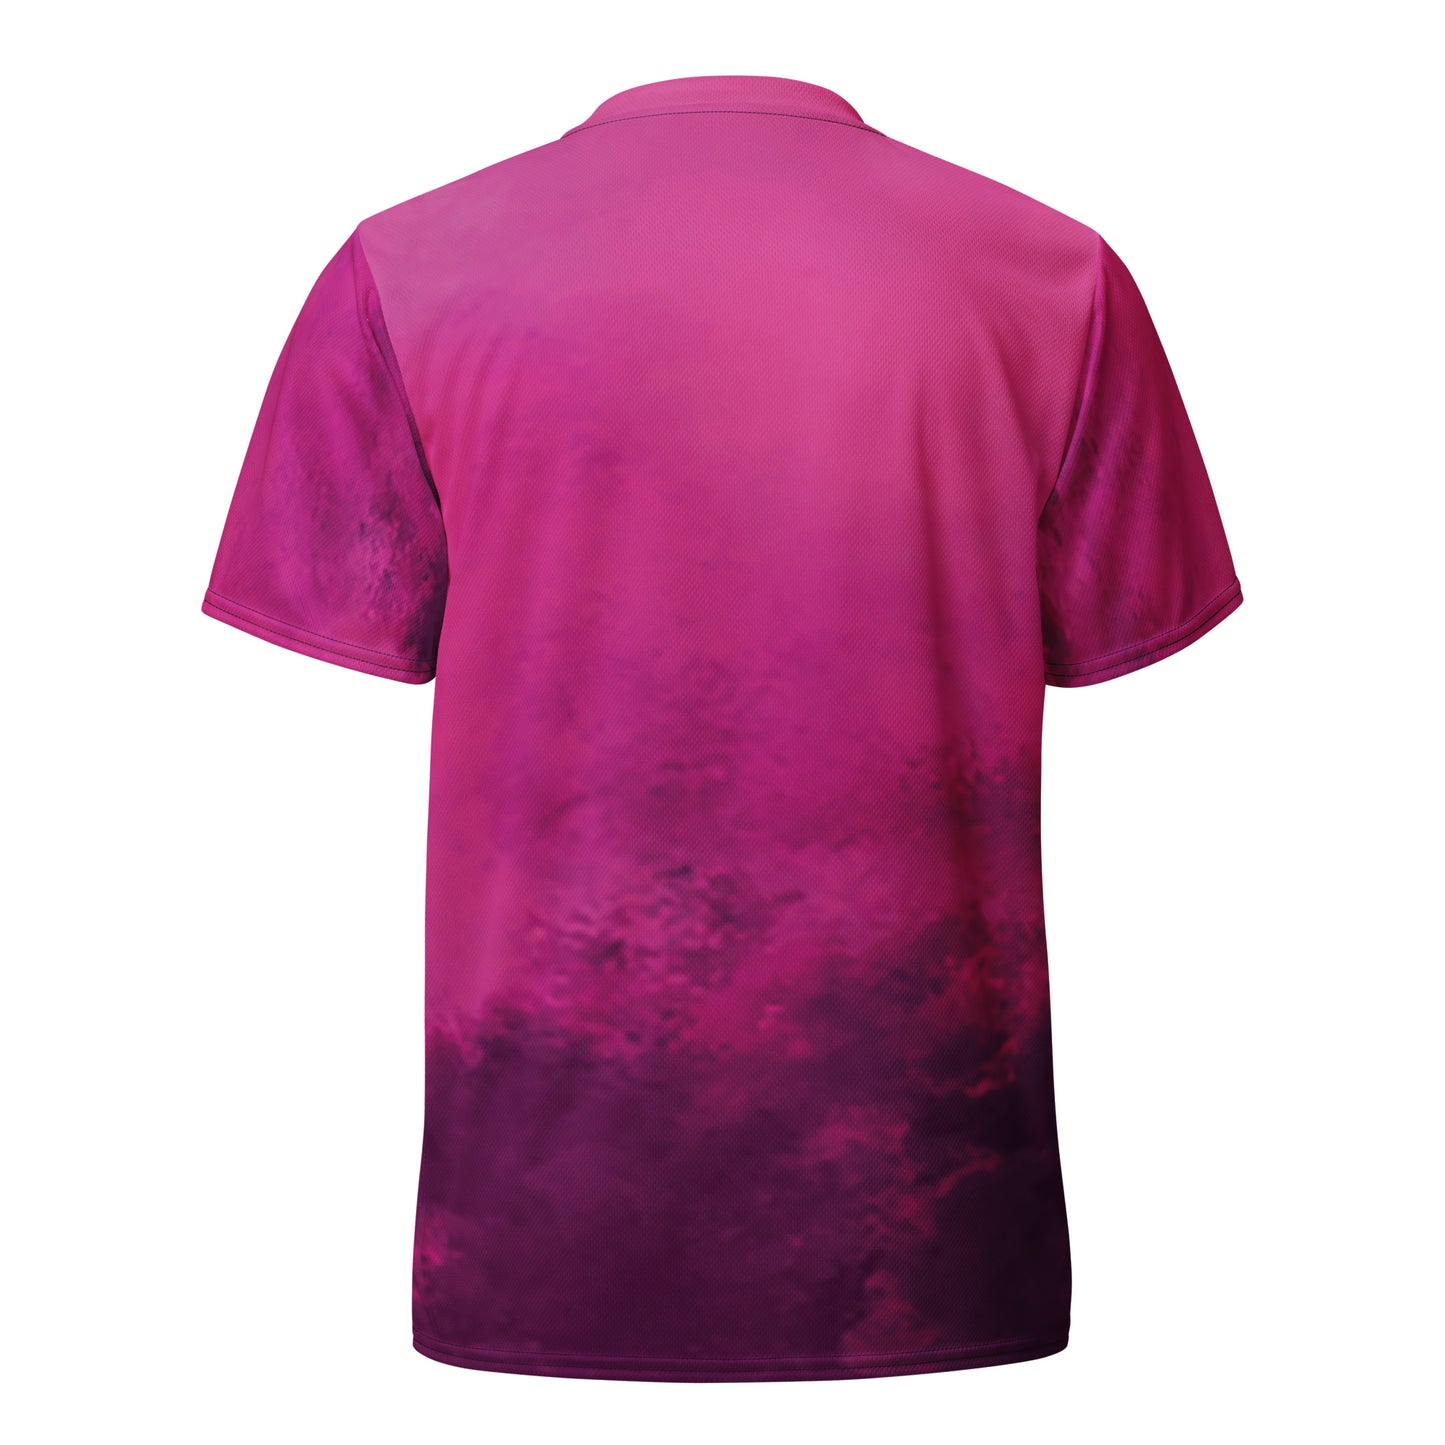 ROSE of EARL  Recycled unisex sports jersey